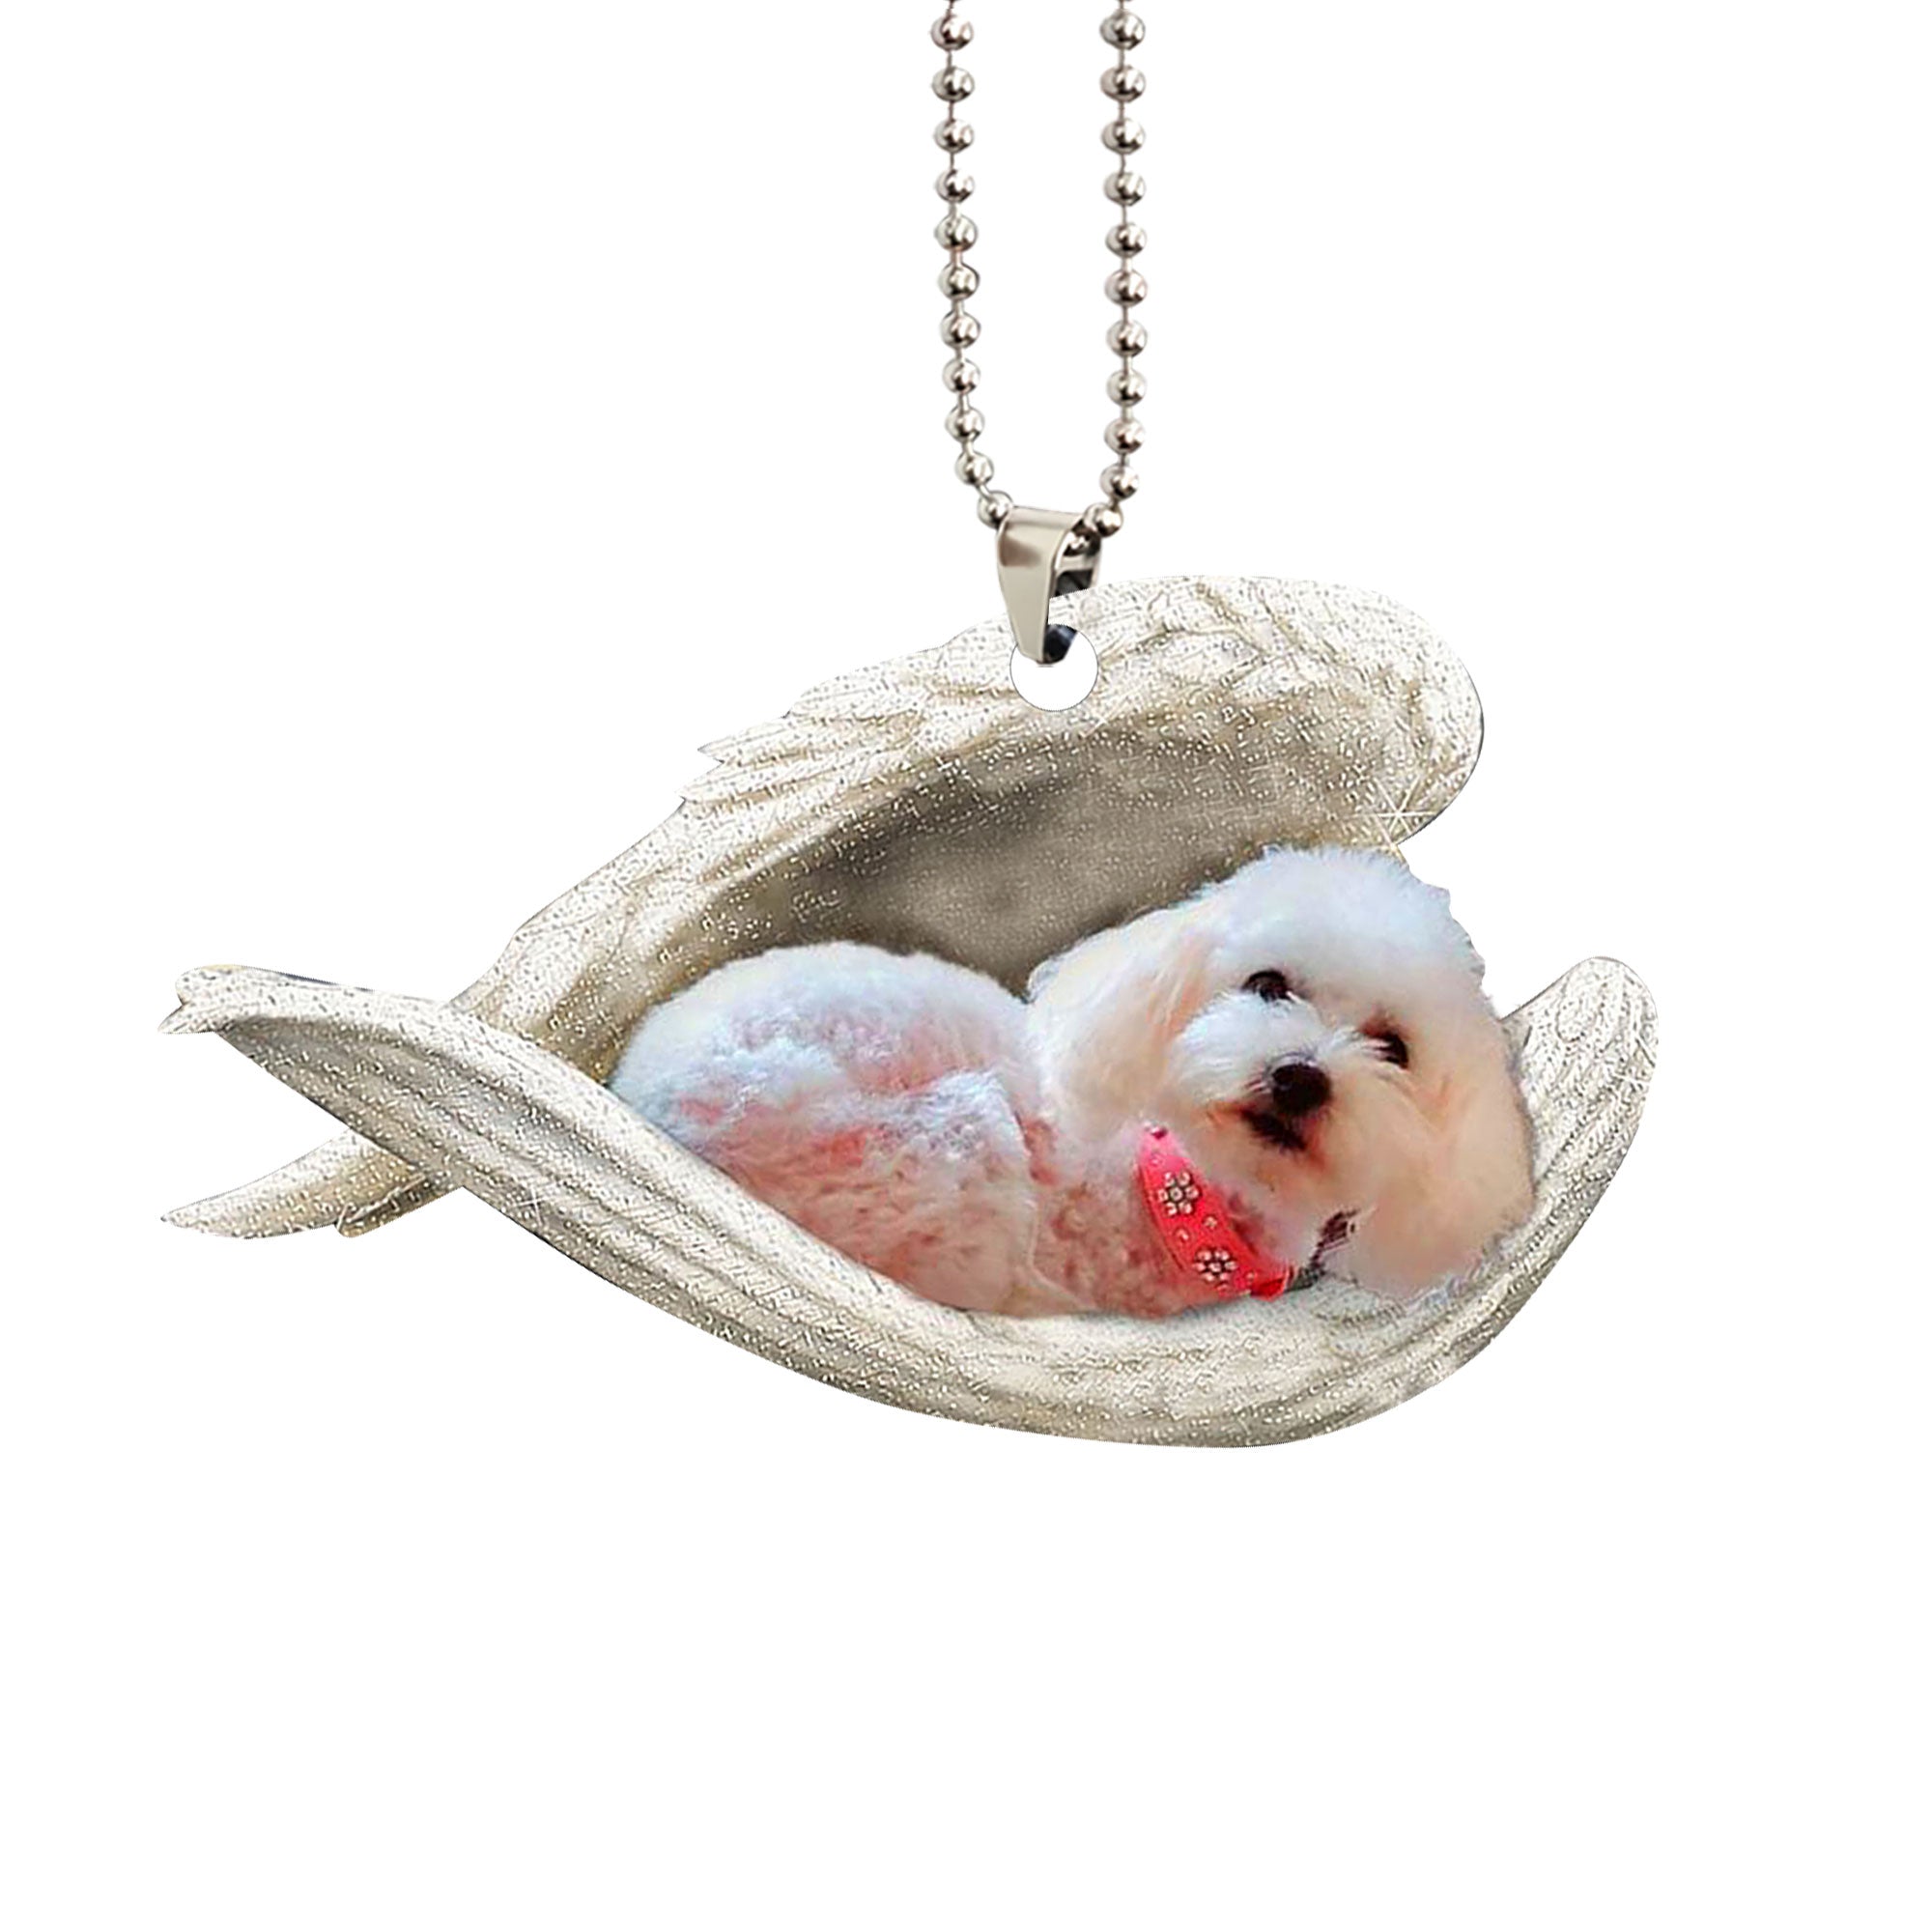 Puppy Lovers Car Rear View Mirror Accessories Car Ornament Hanging Charm  Interior Rearview Pendant Decor